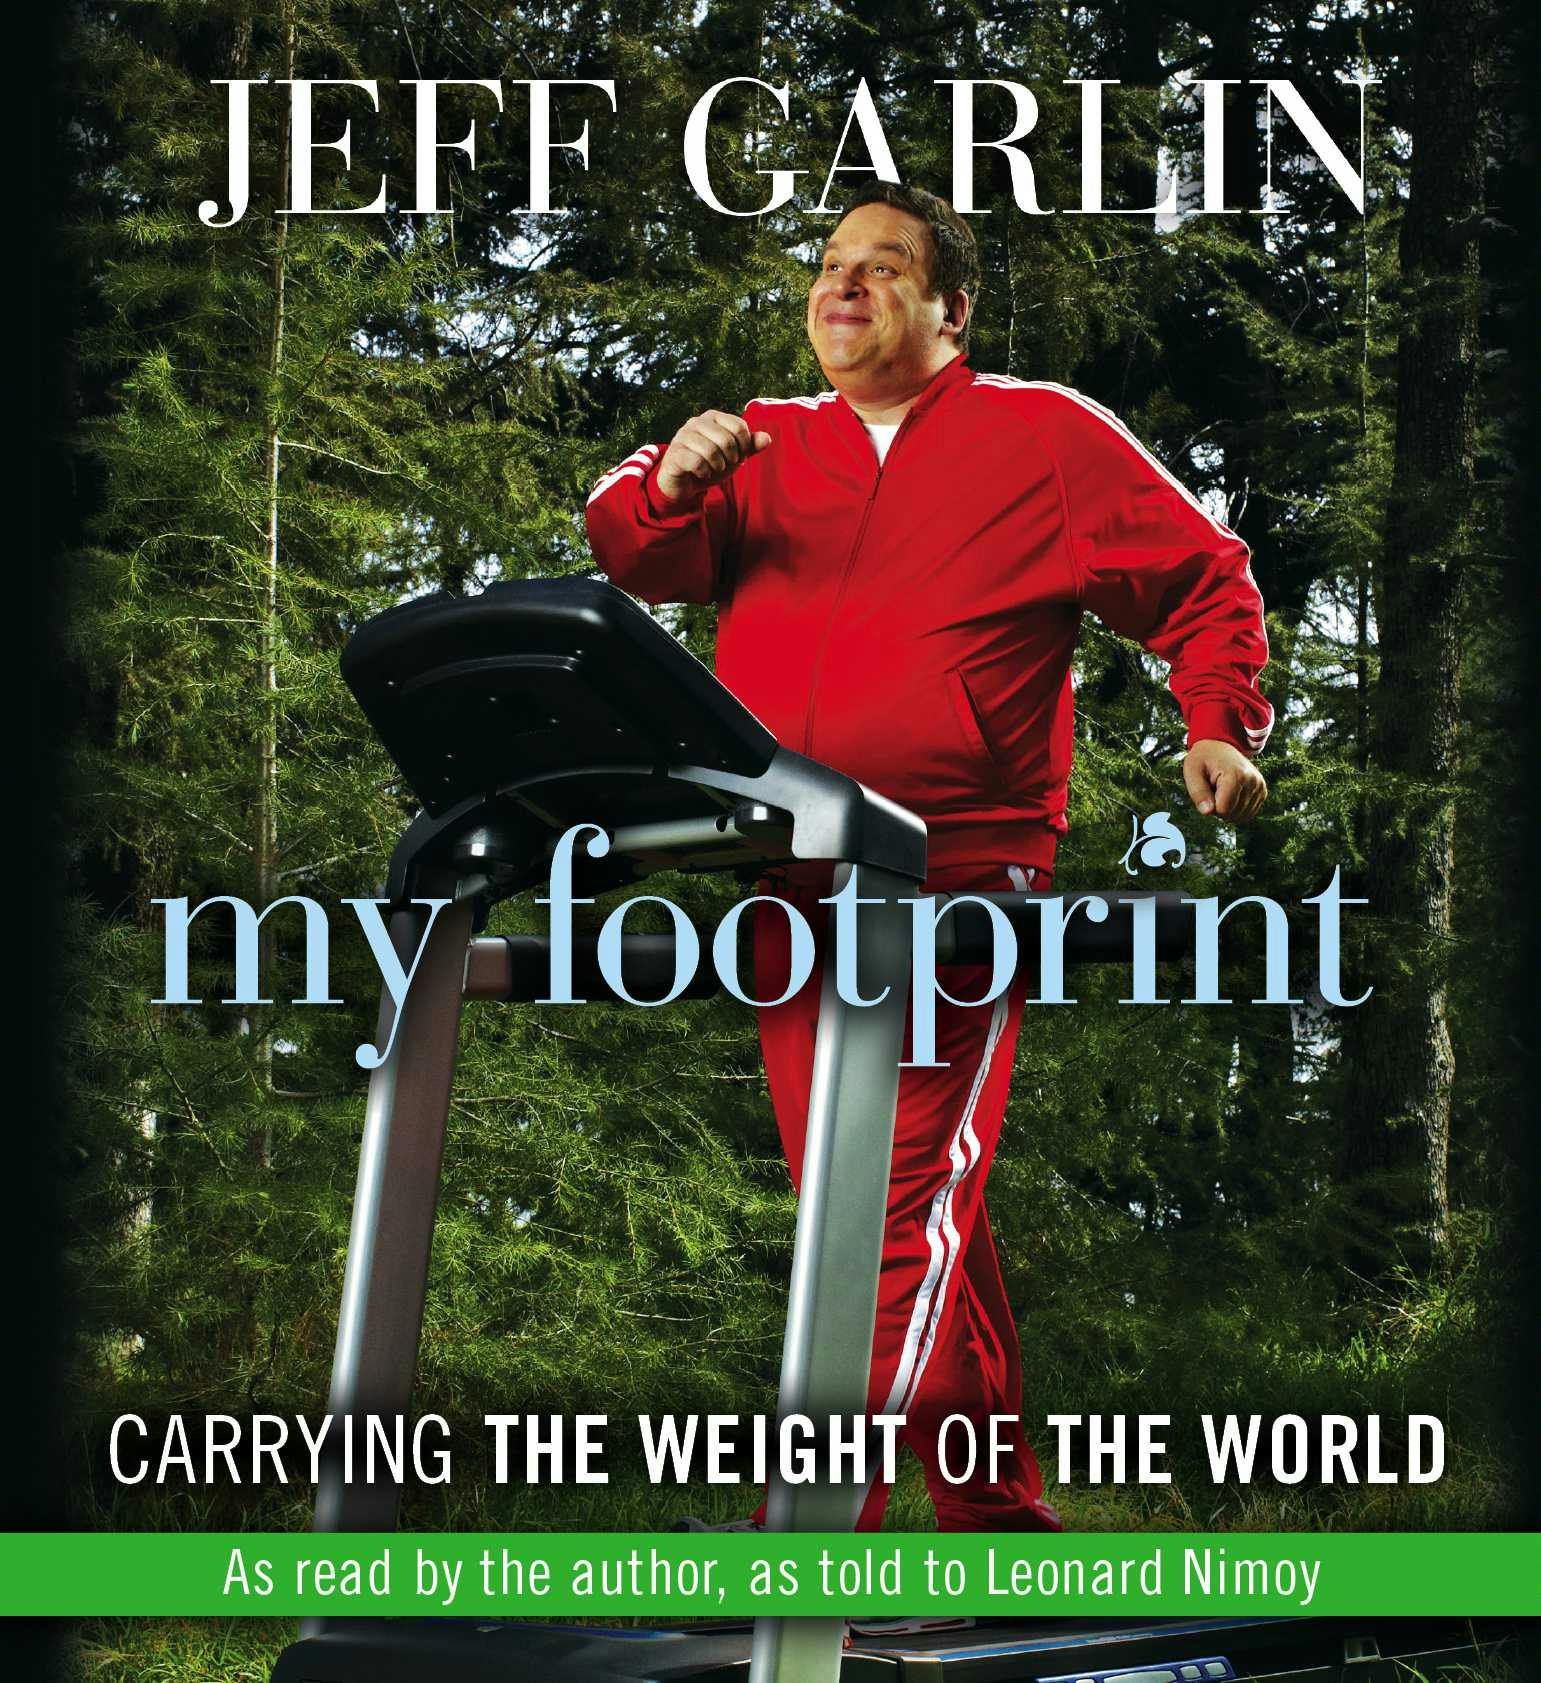 My Footprint: Carrying the Weight of the World - Jeff Garlin